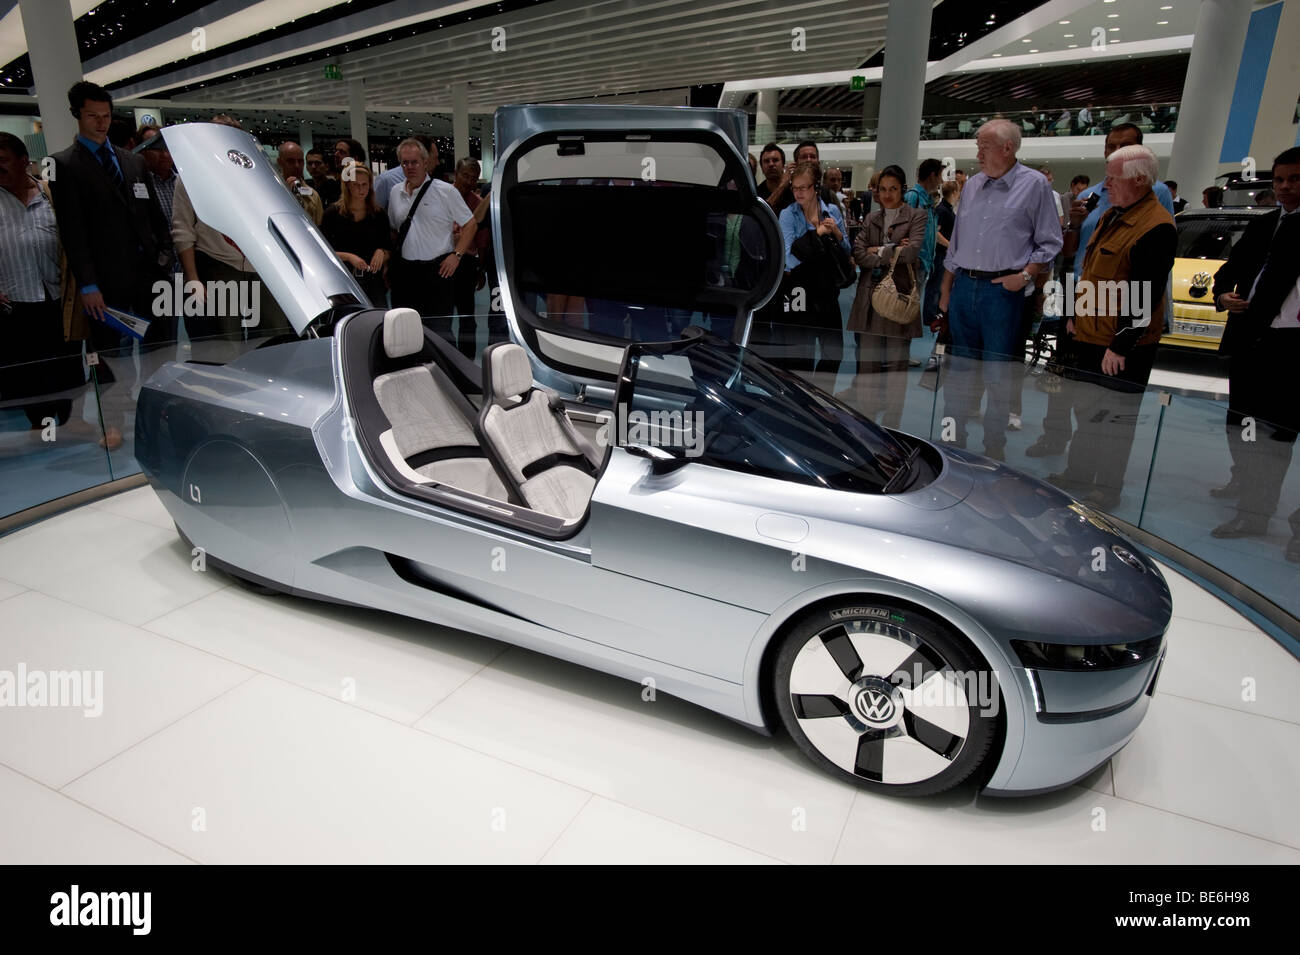 Volkswagen L1 ultra low fuel consumption concept vehicle on display at the Frankfurt Motor Show 2009 Stock Photo